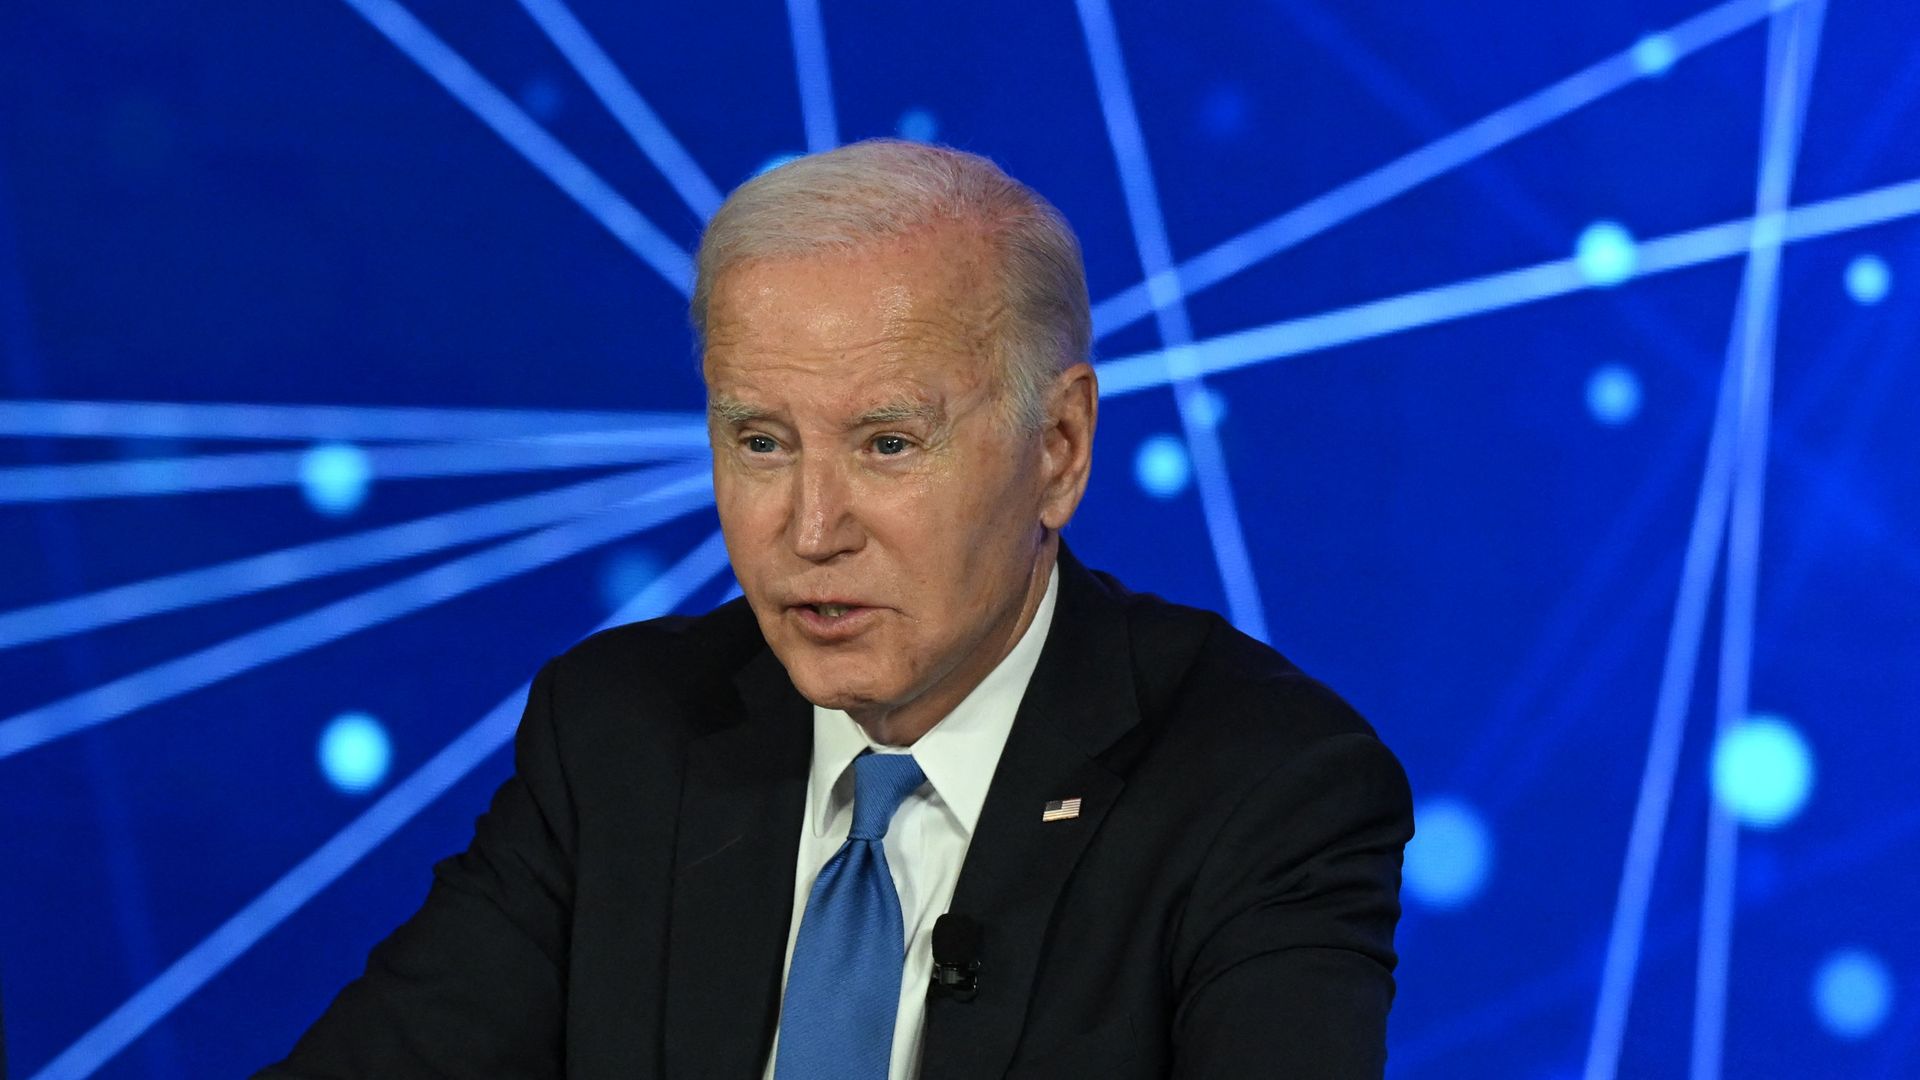  President Joe Biden discusses his Administration's commitment to seizing the opportunities and managing the risks of Artificial Intelligence, in San Francisco, California, on Tuesday.